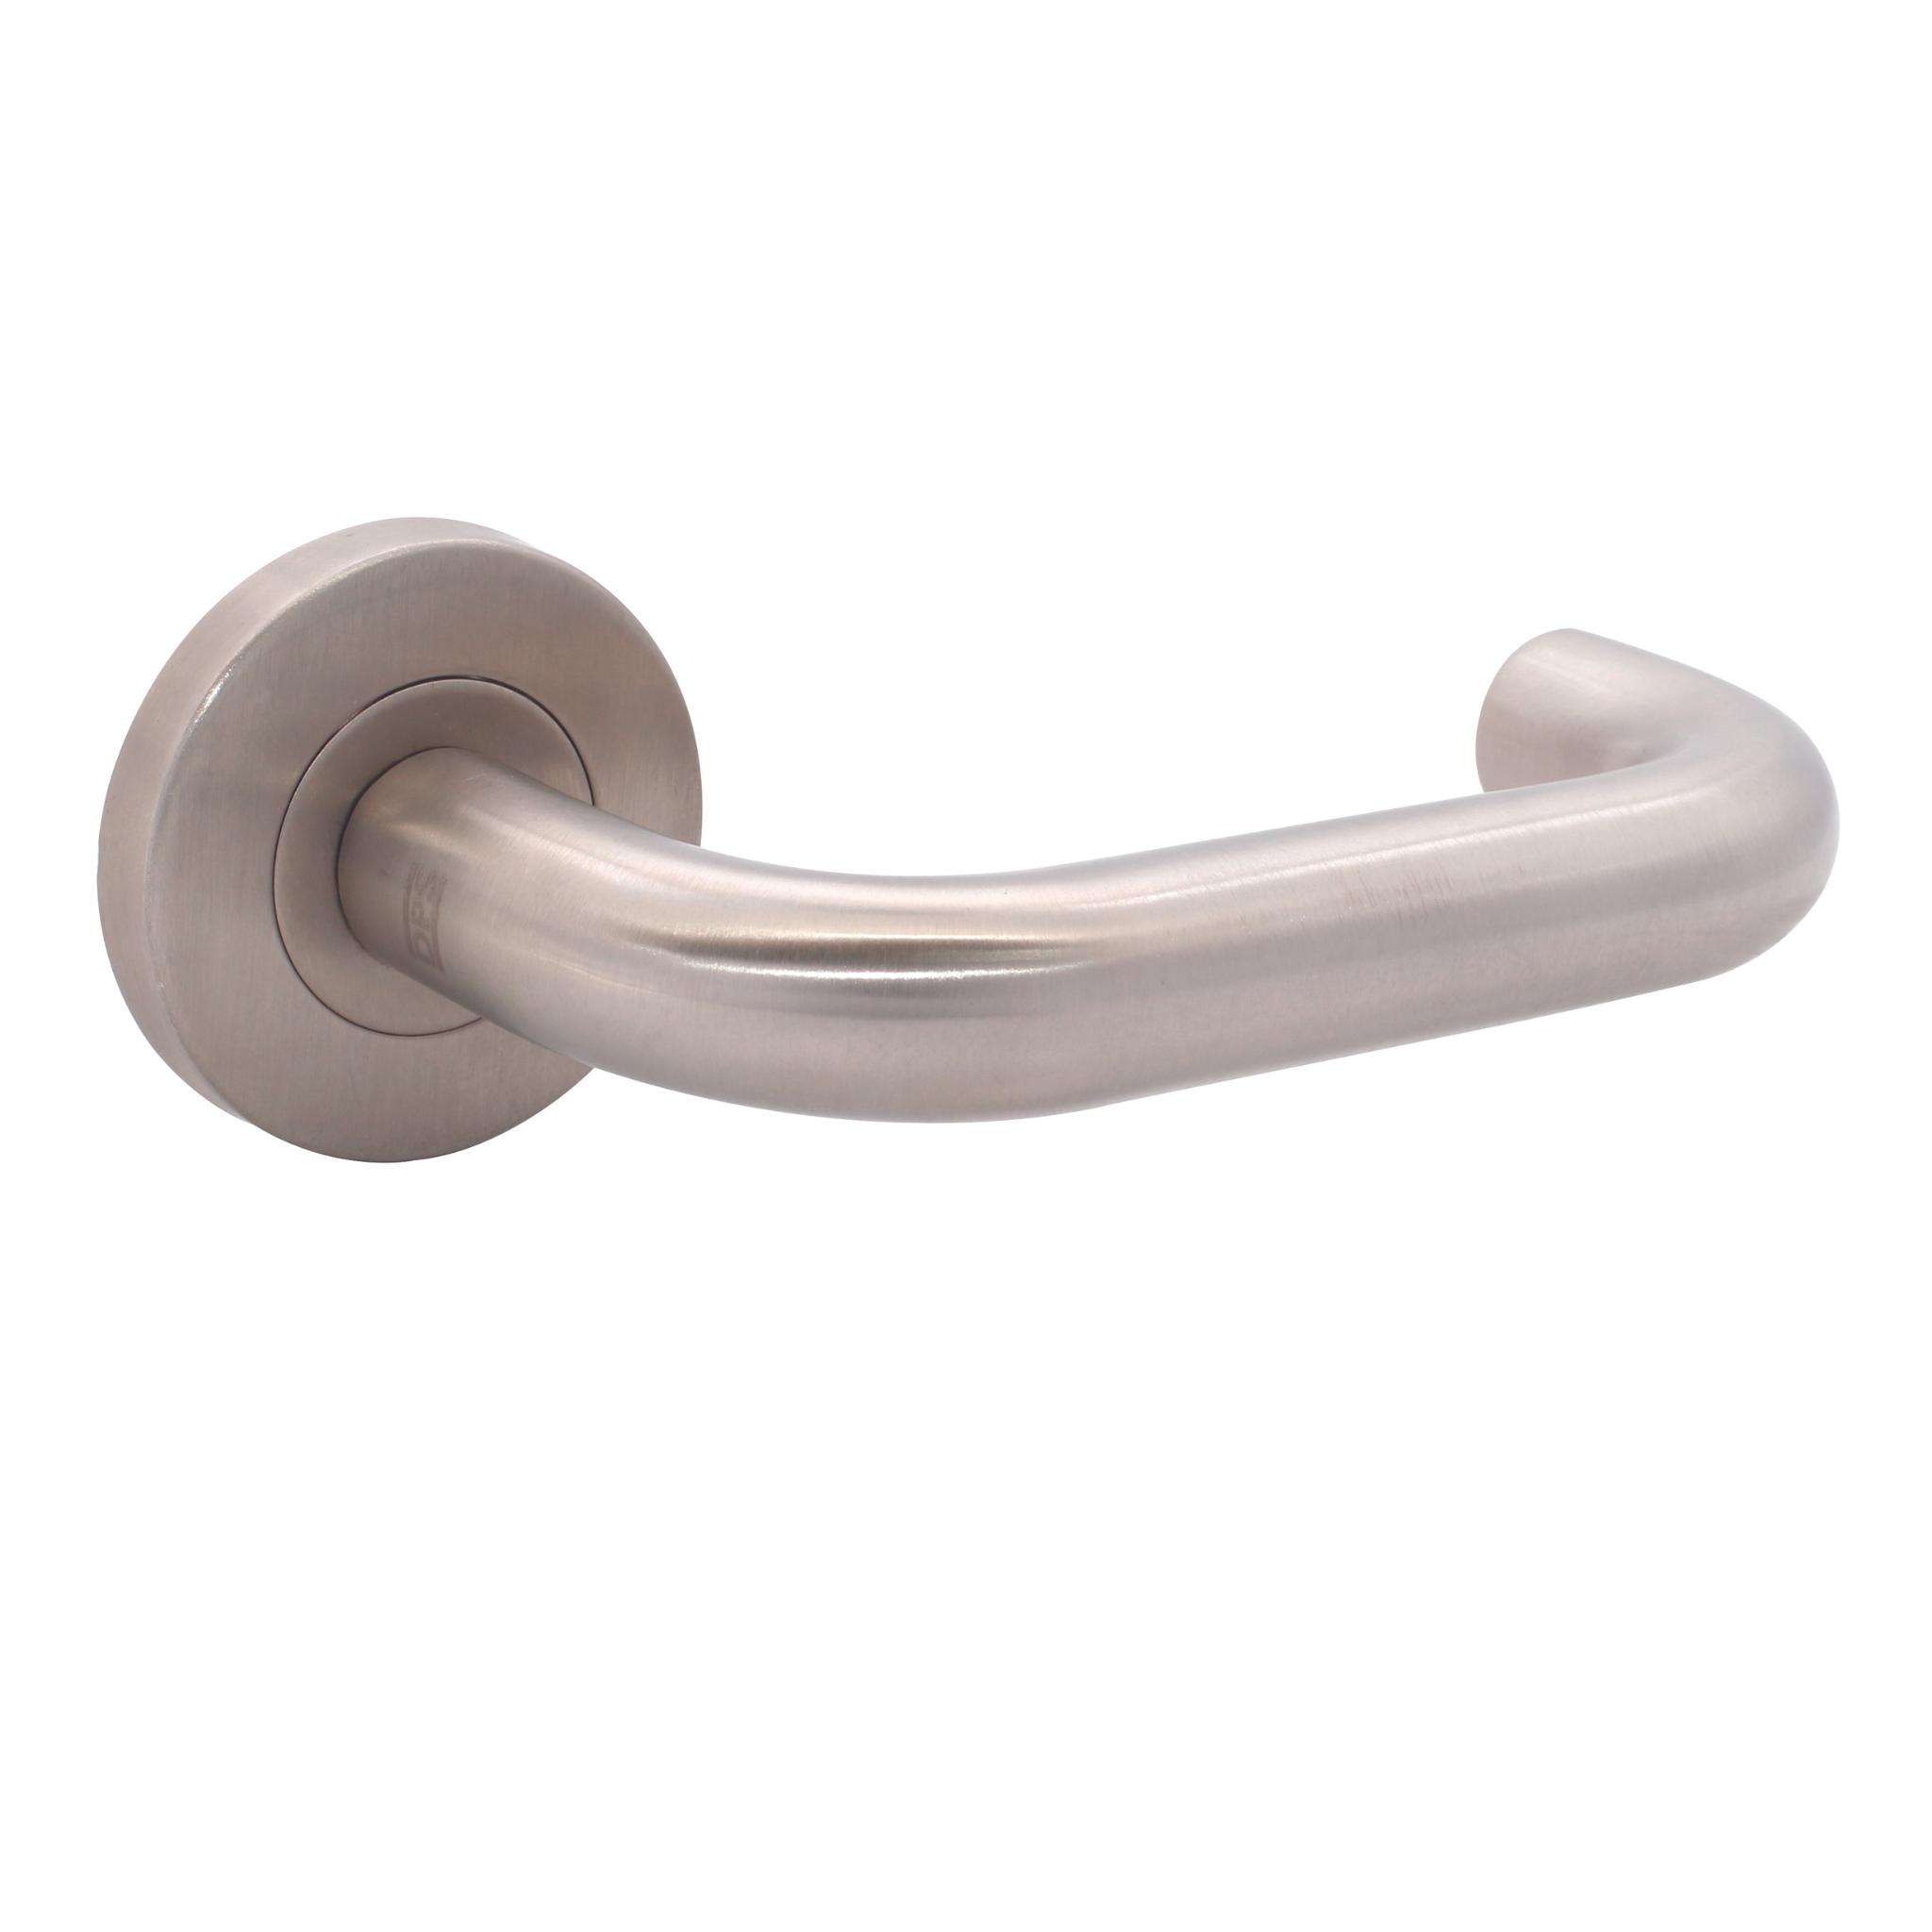 FT08.R._.TR, Lever Handles, Tubular, On Round Rose, With Escutcheons, Stainless Steel with Tarnish Resistant, CISA